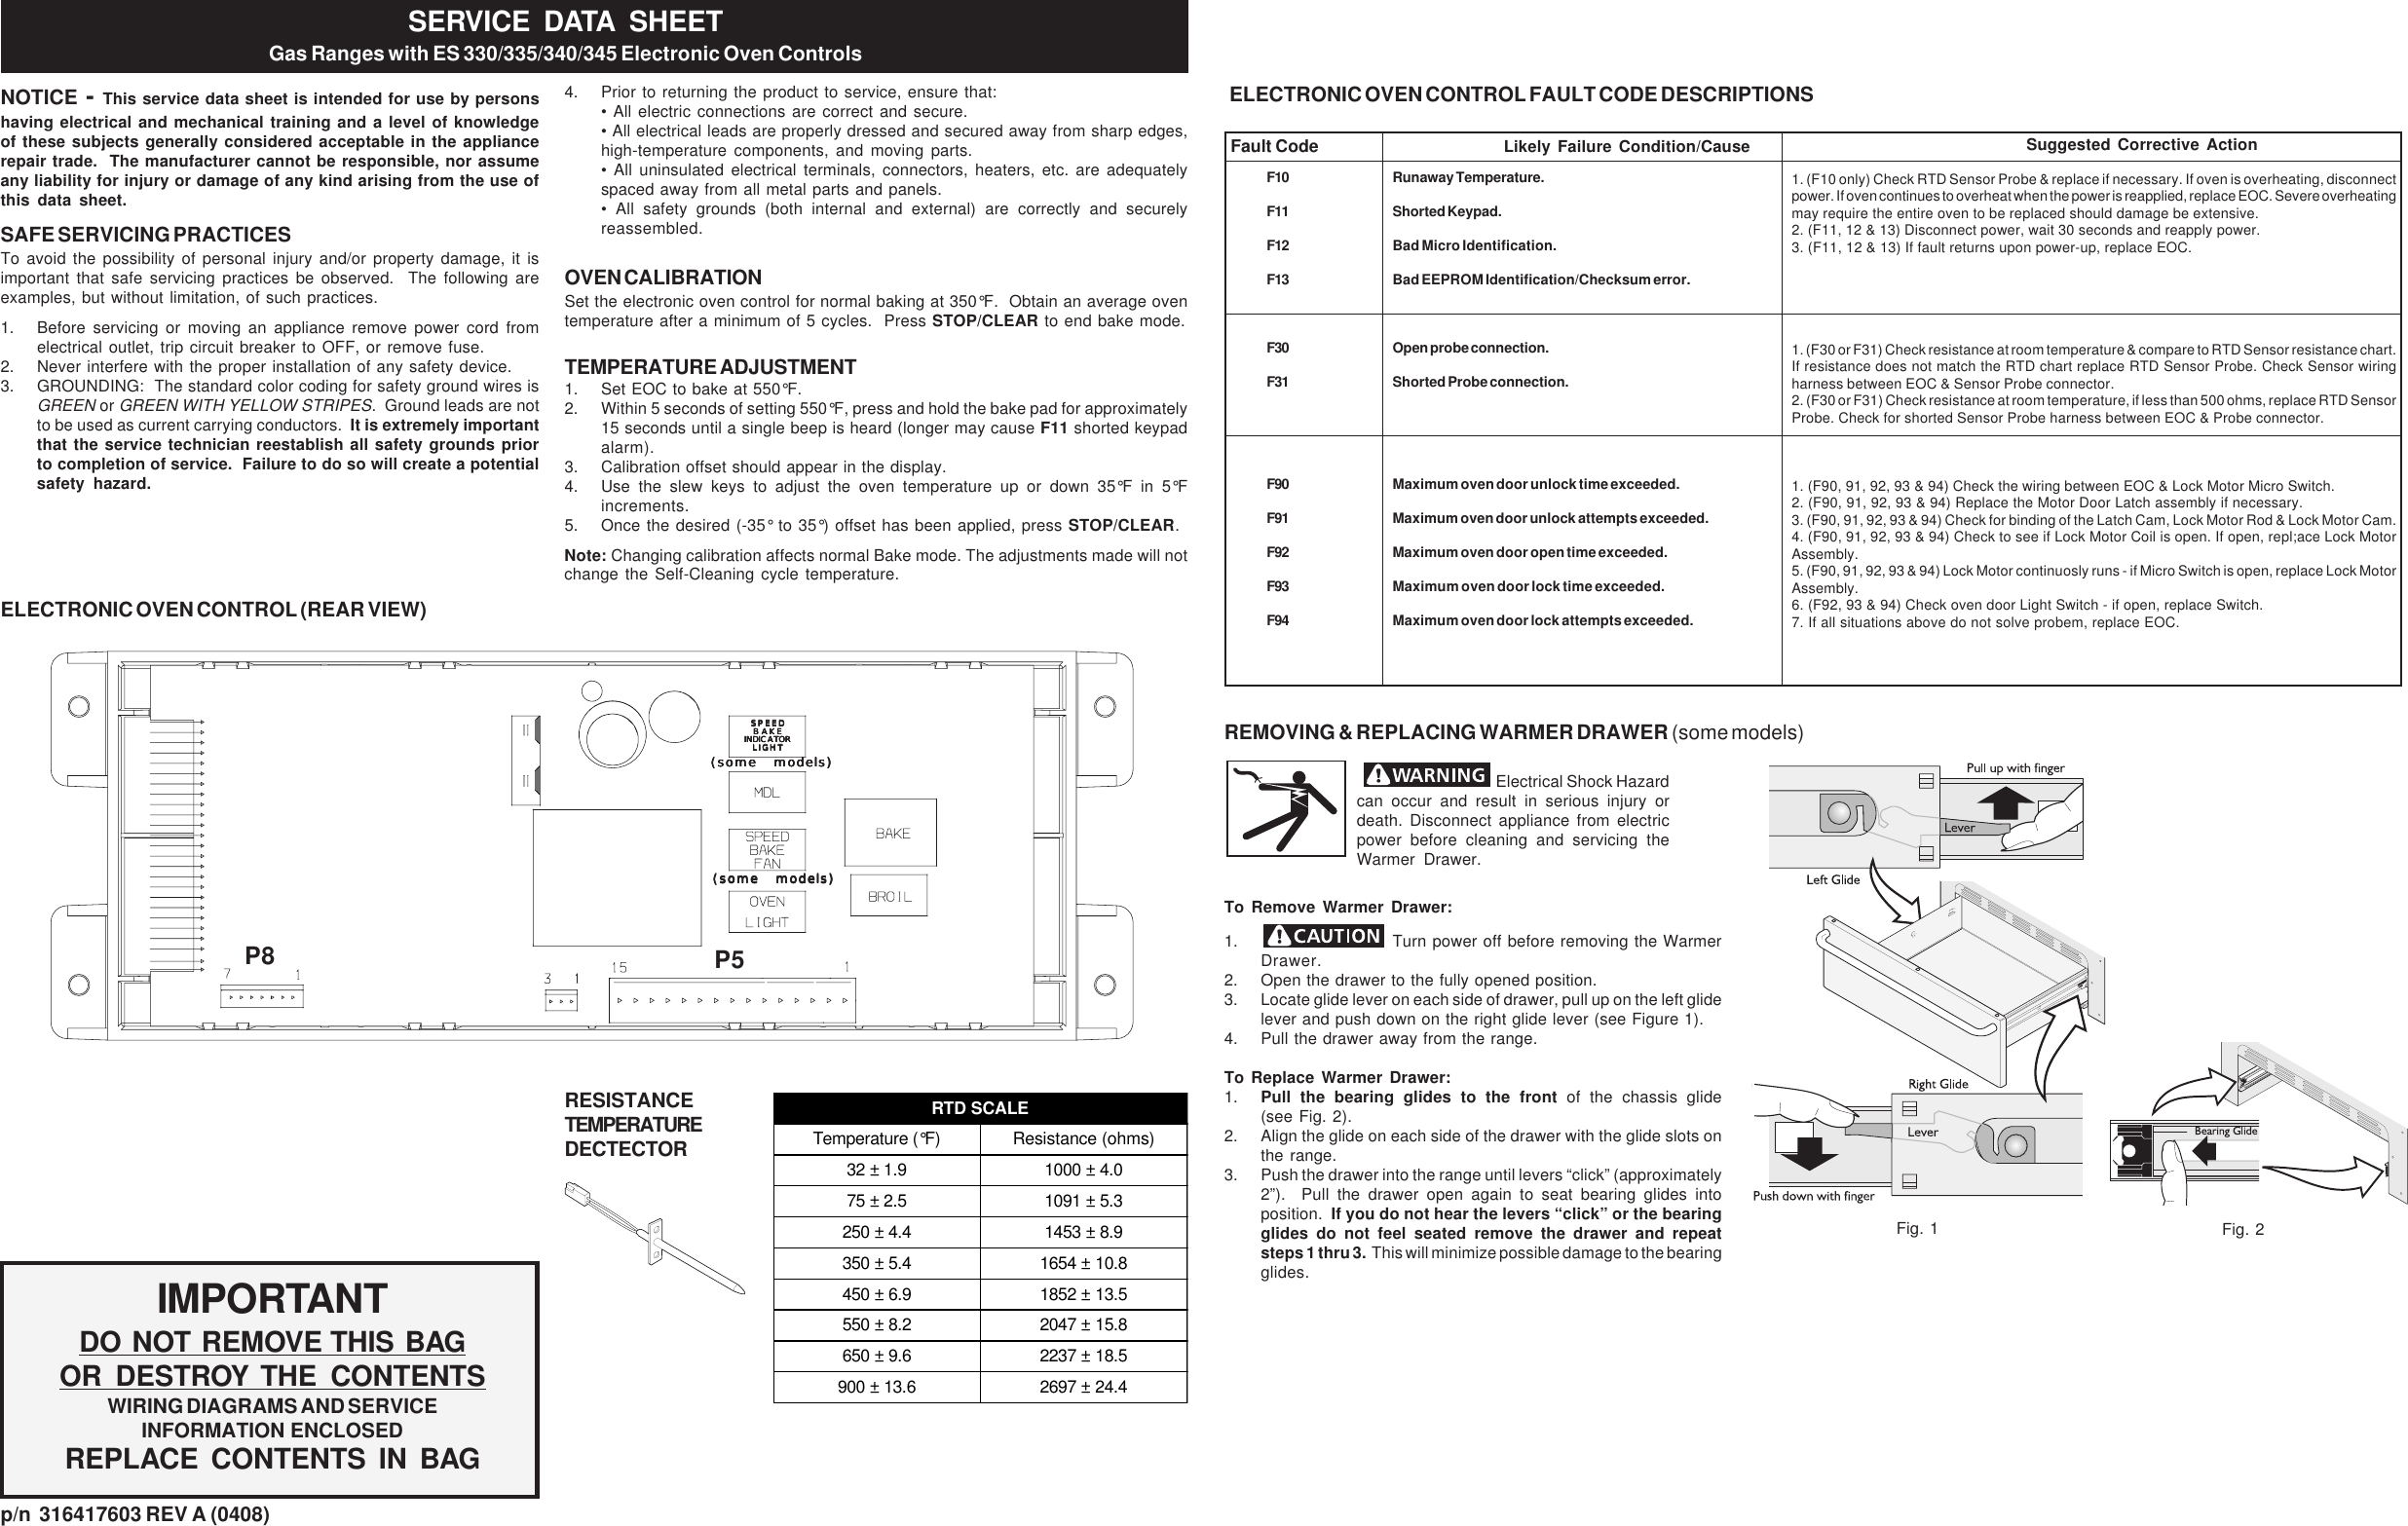 Page 1 of 2 - 316417603_0408.p65  Kenmore - Frigidaire Gas Ranges With ES 330-335-340-345 Electronic Oven Controls Tech Data Sheet, 0